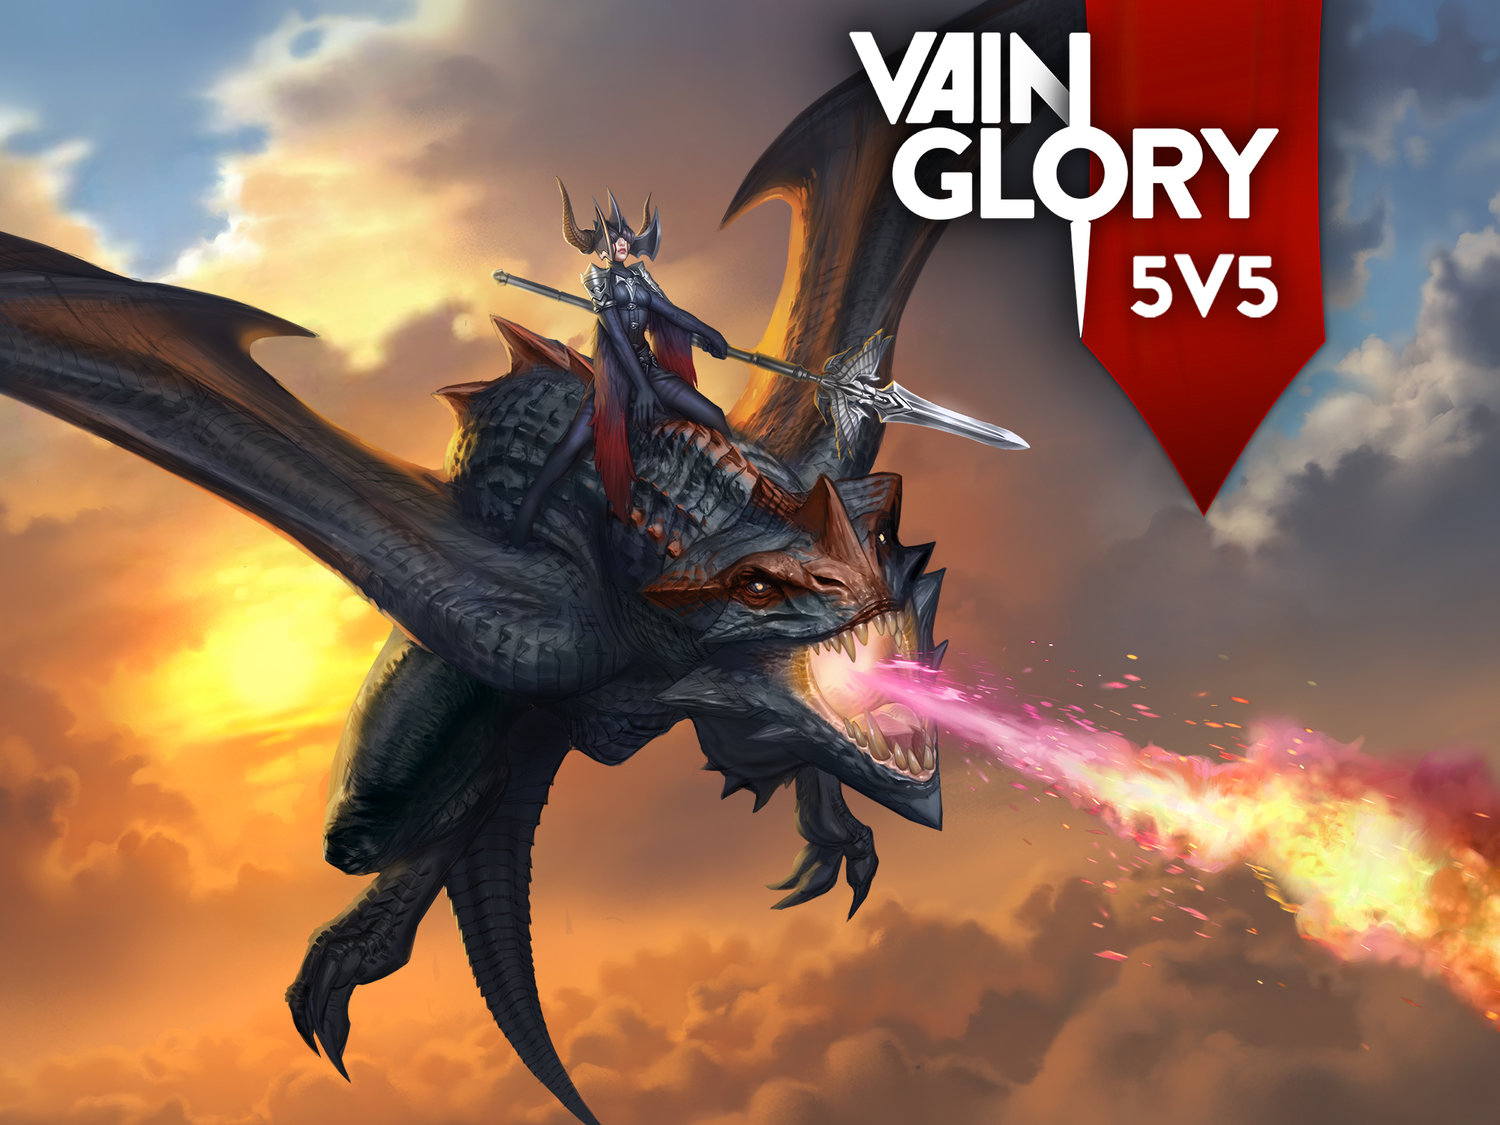 Vainglory 5v5 Hails The Arrival Of No Compromises Core Gaming On Mobile Super Evil Megacorp